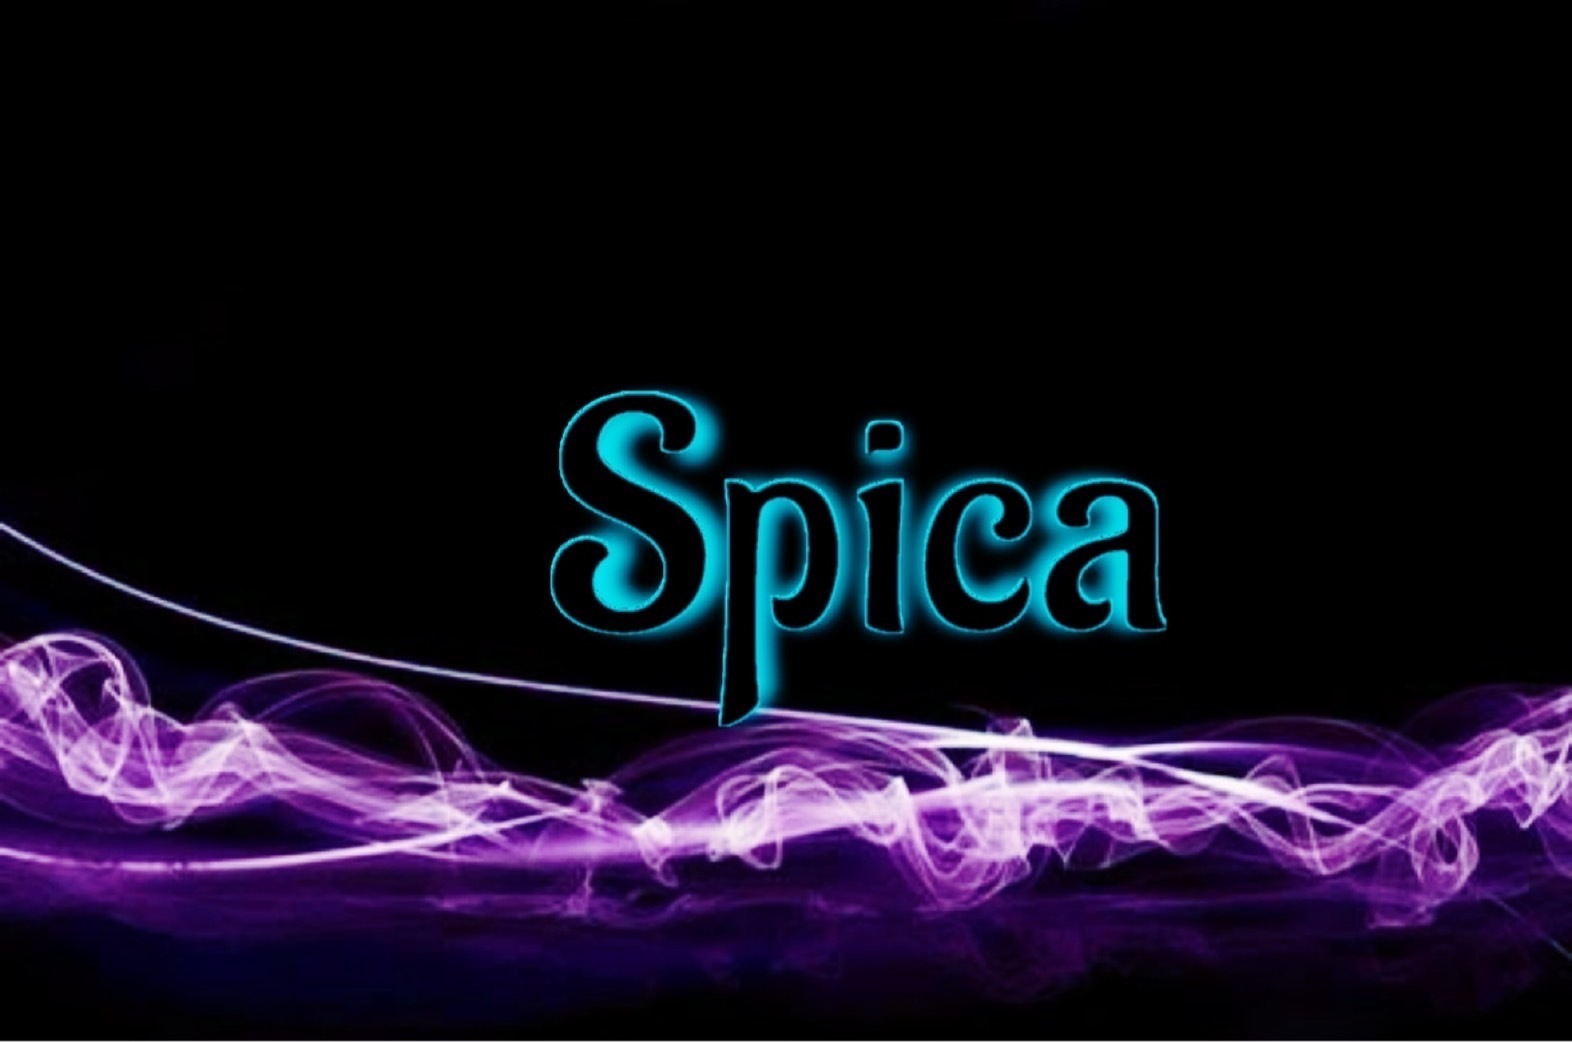 Spica**